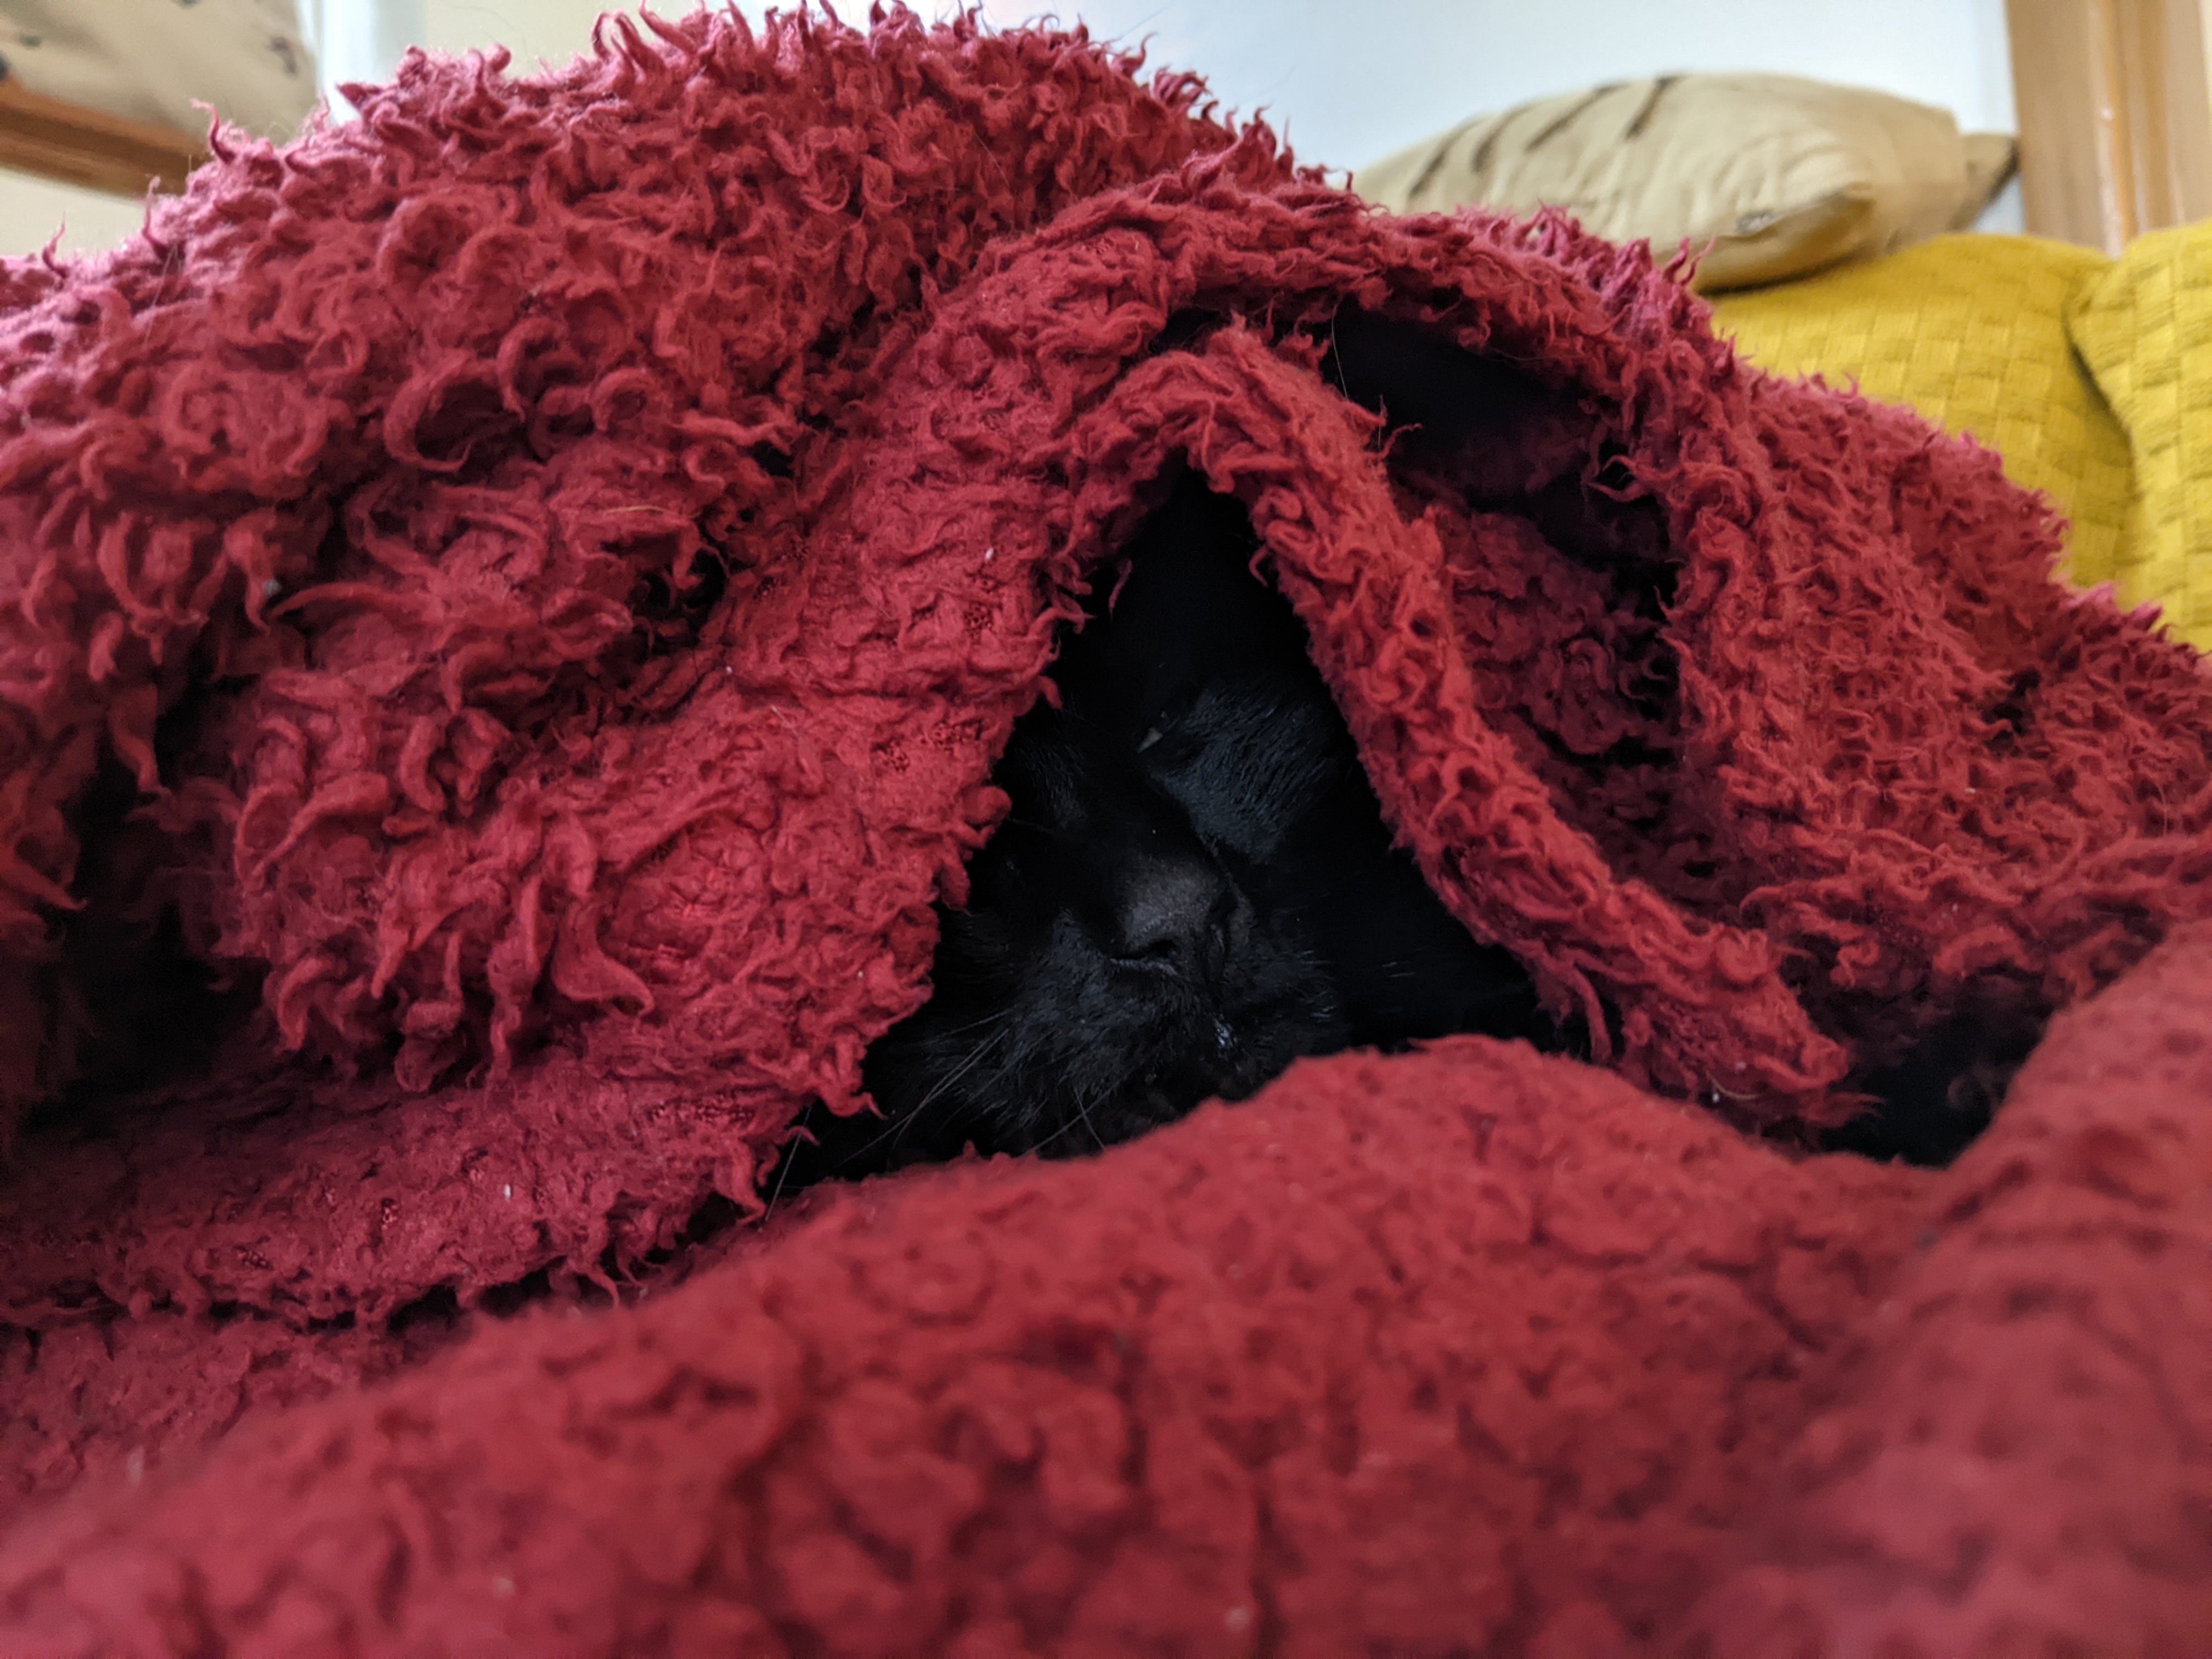 Black cat (Morph) wrapped up in a red blanket, with it mostly covering him, aside from a small portion of his face visible, with his nose, and one eye slightly open and looking at the camera